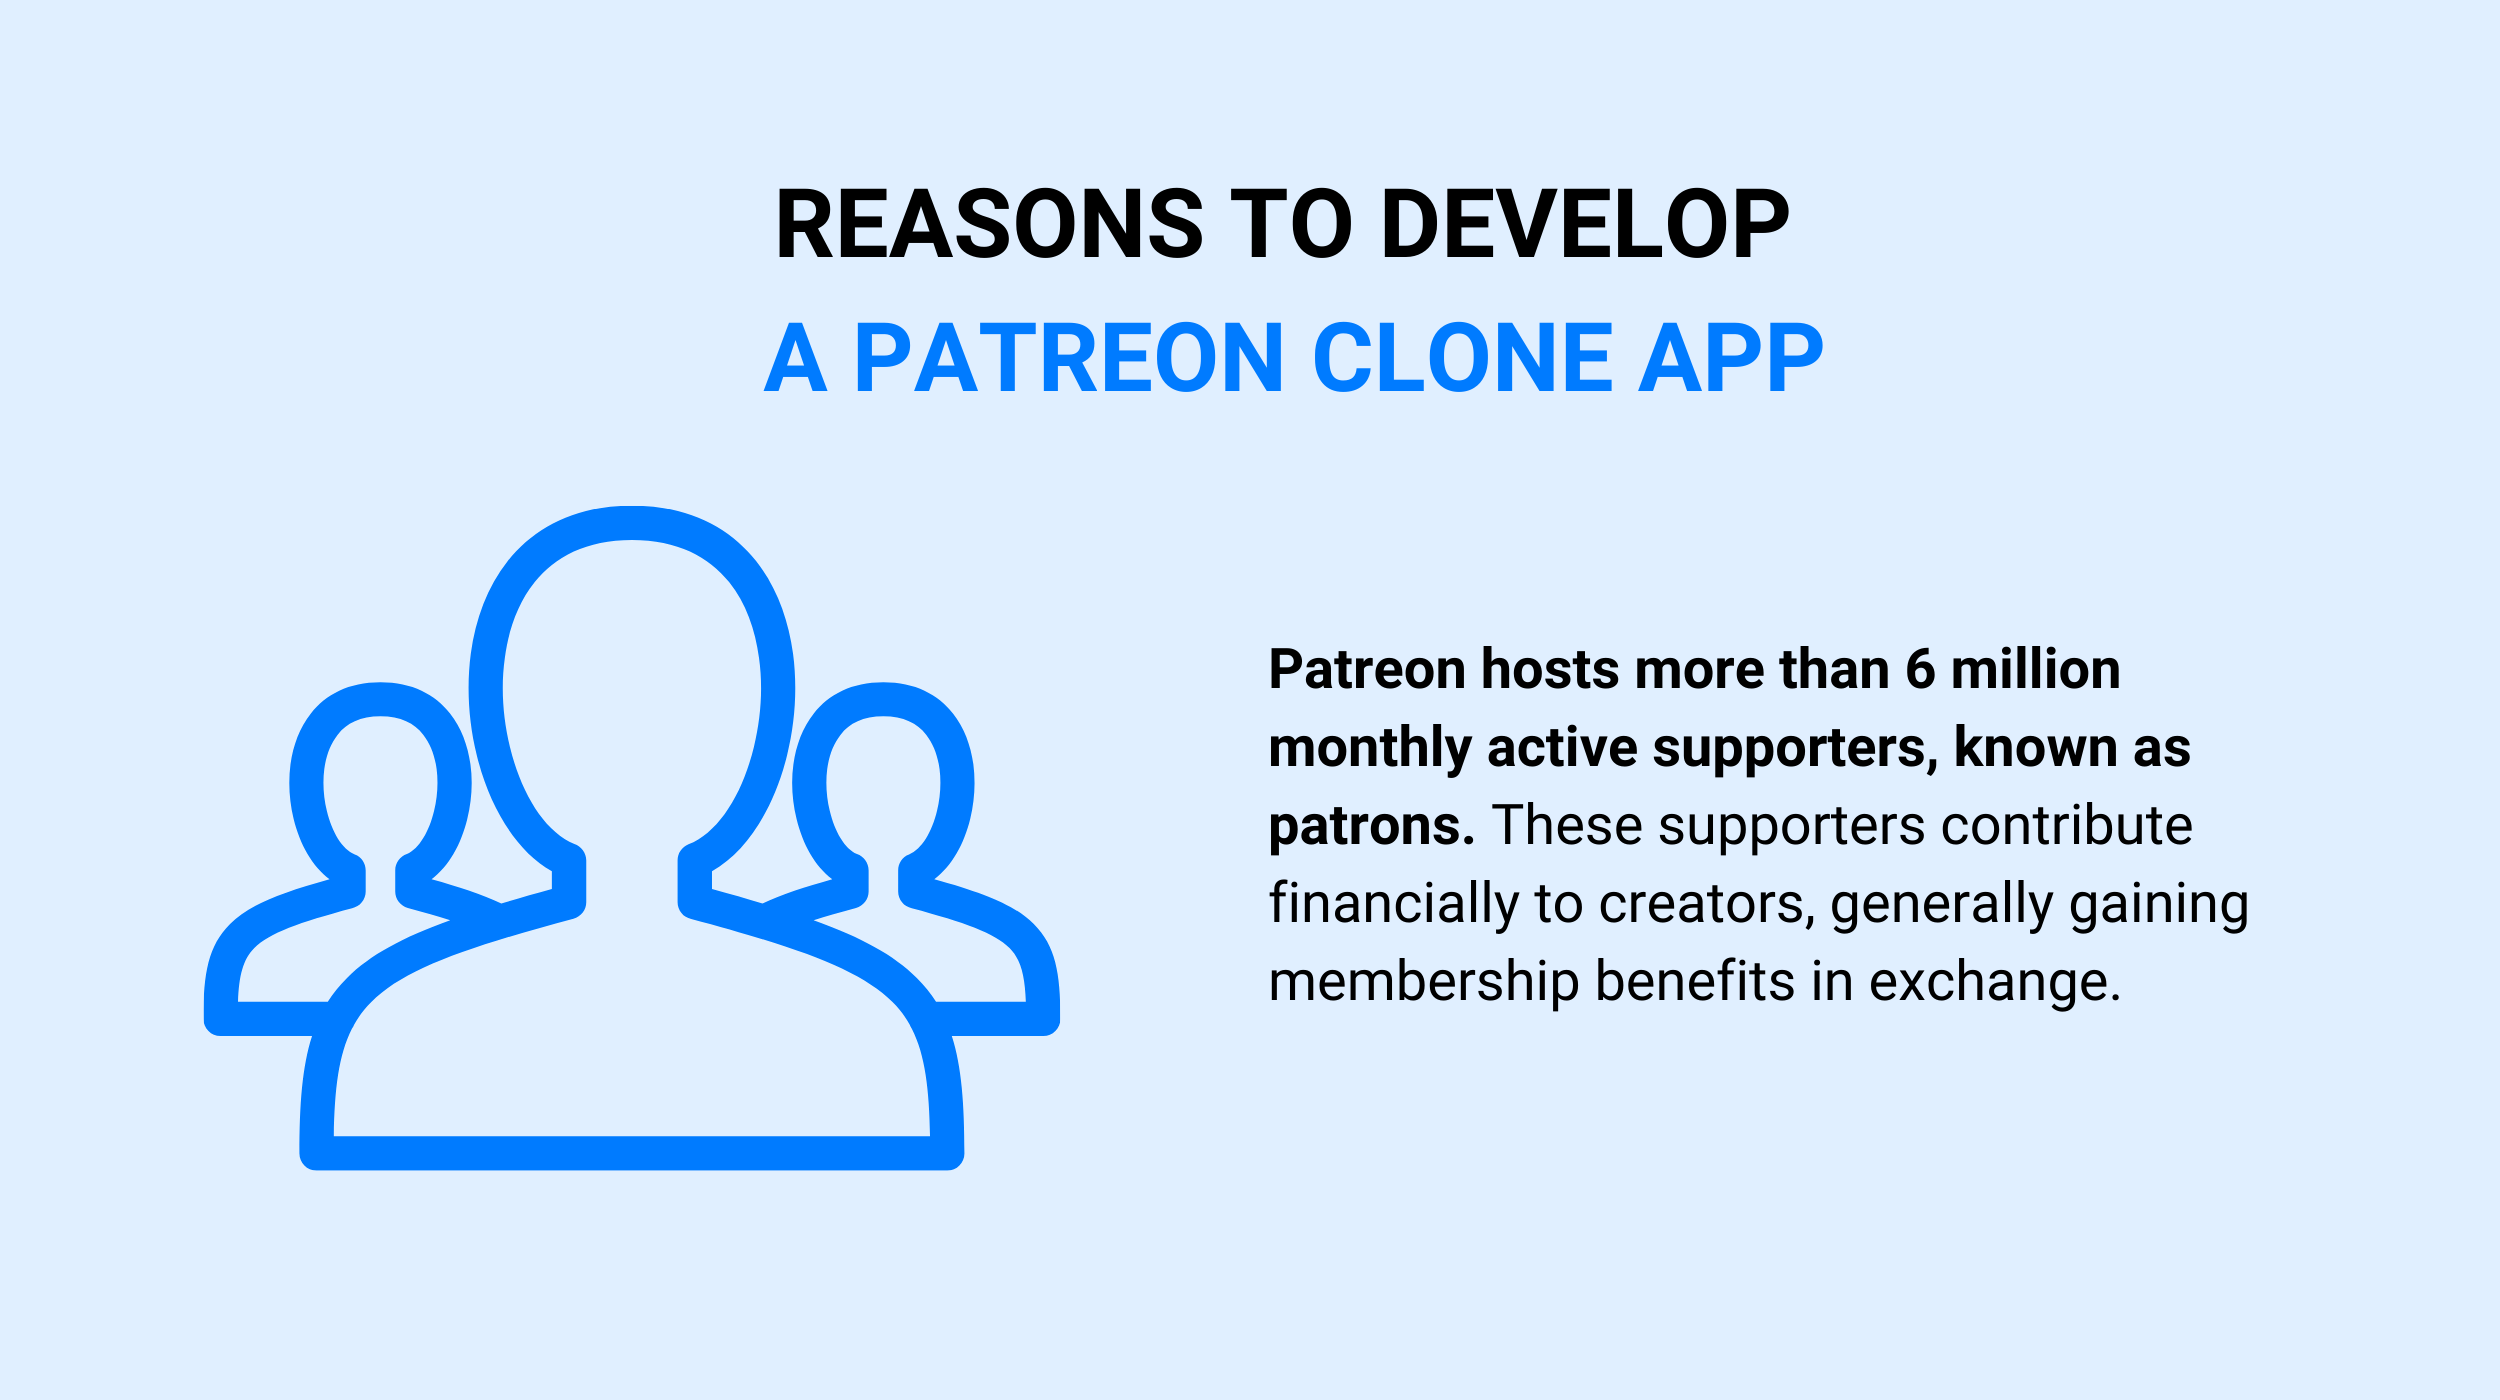 Reasons to Develop a Patreon Clone App